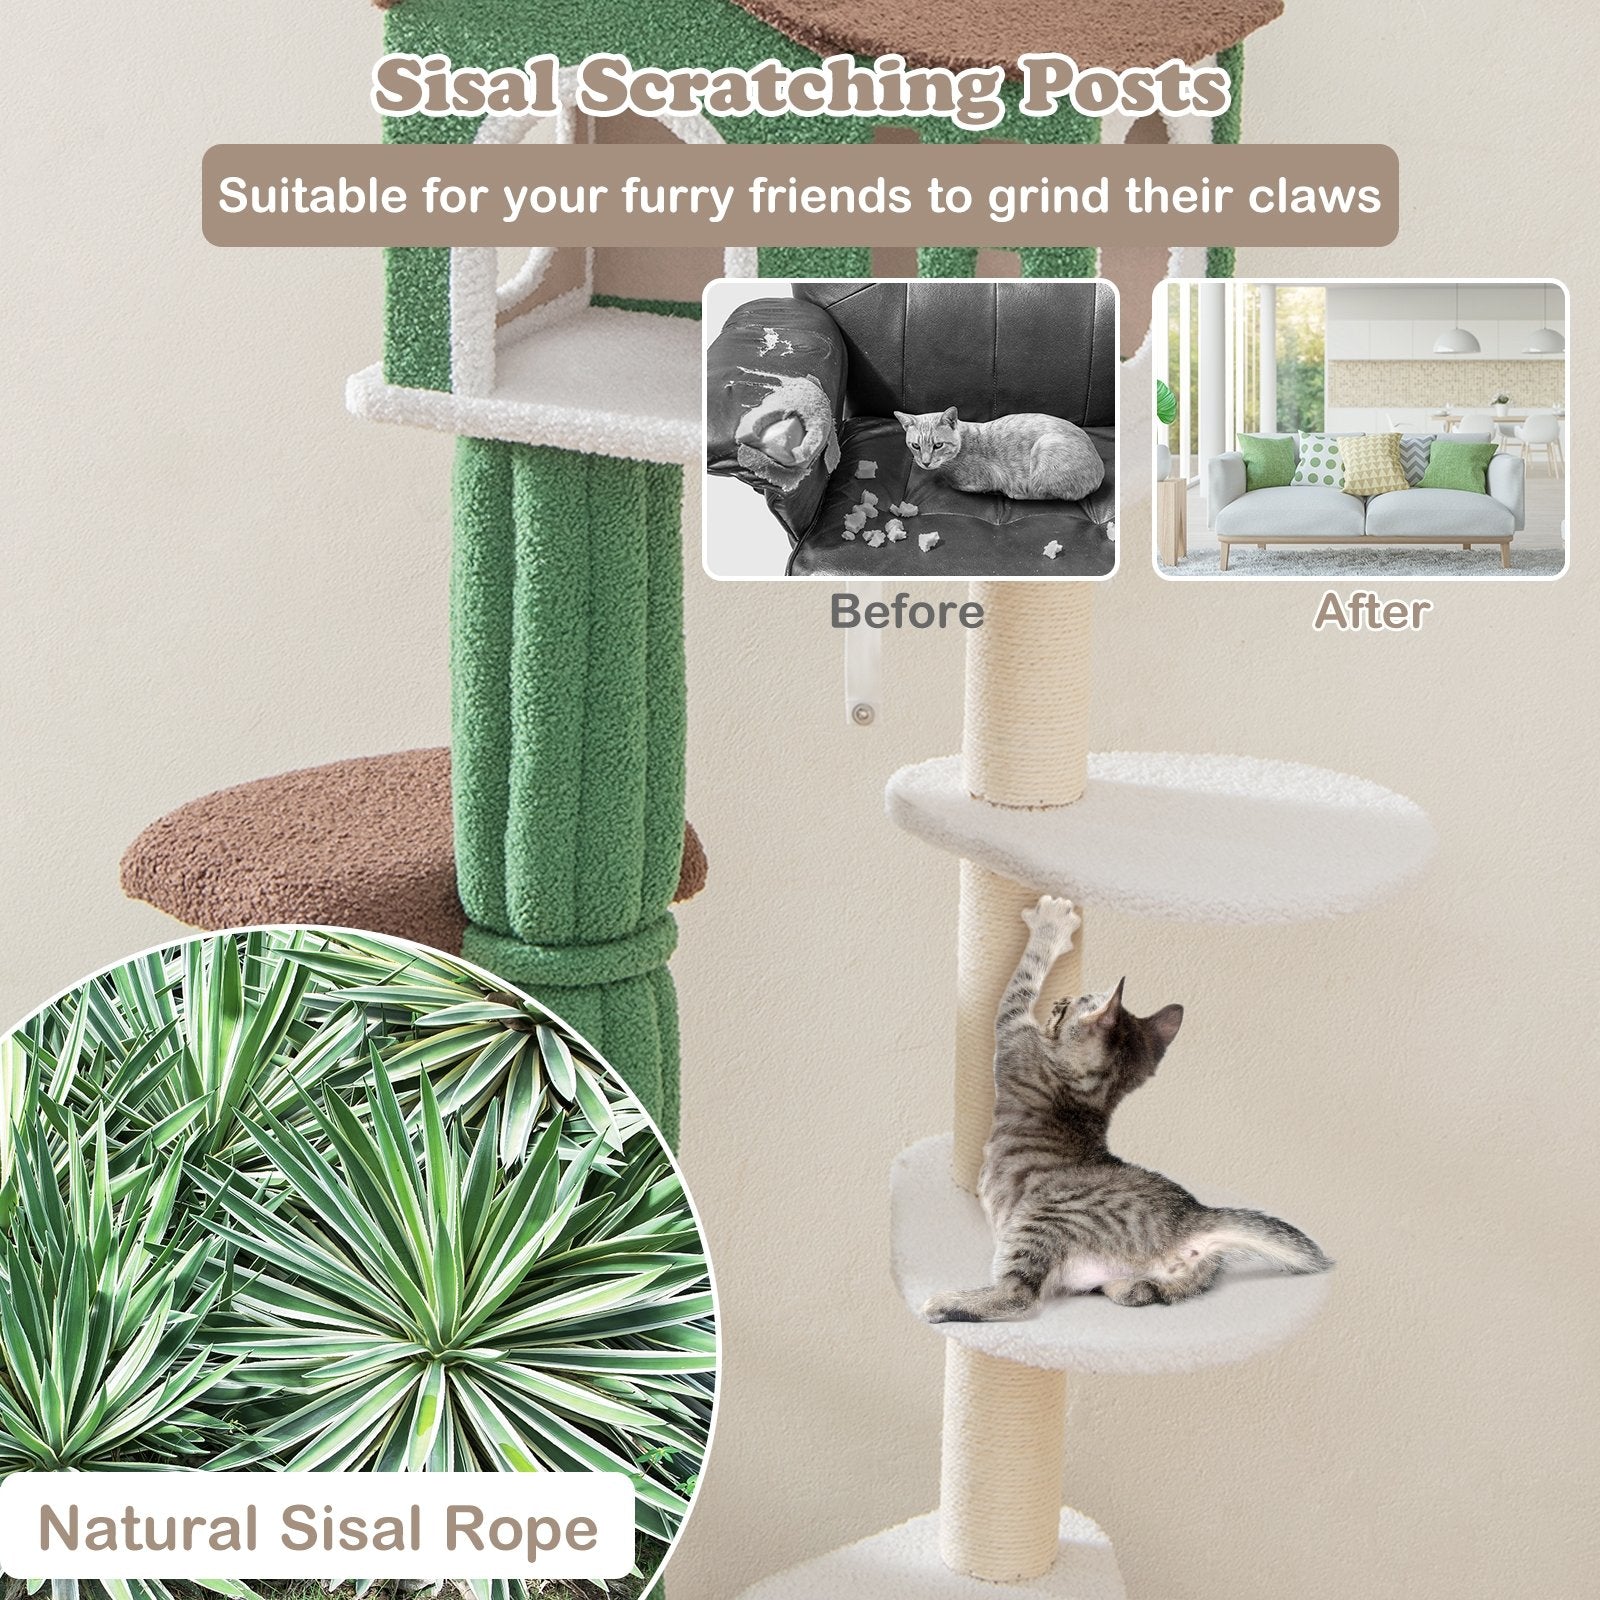 Multi-level Cat Tree with Condo andand Anti-tipping Device, Green - Gallery Canada